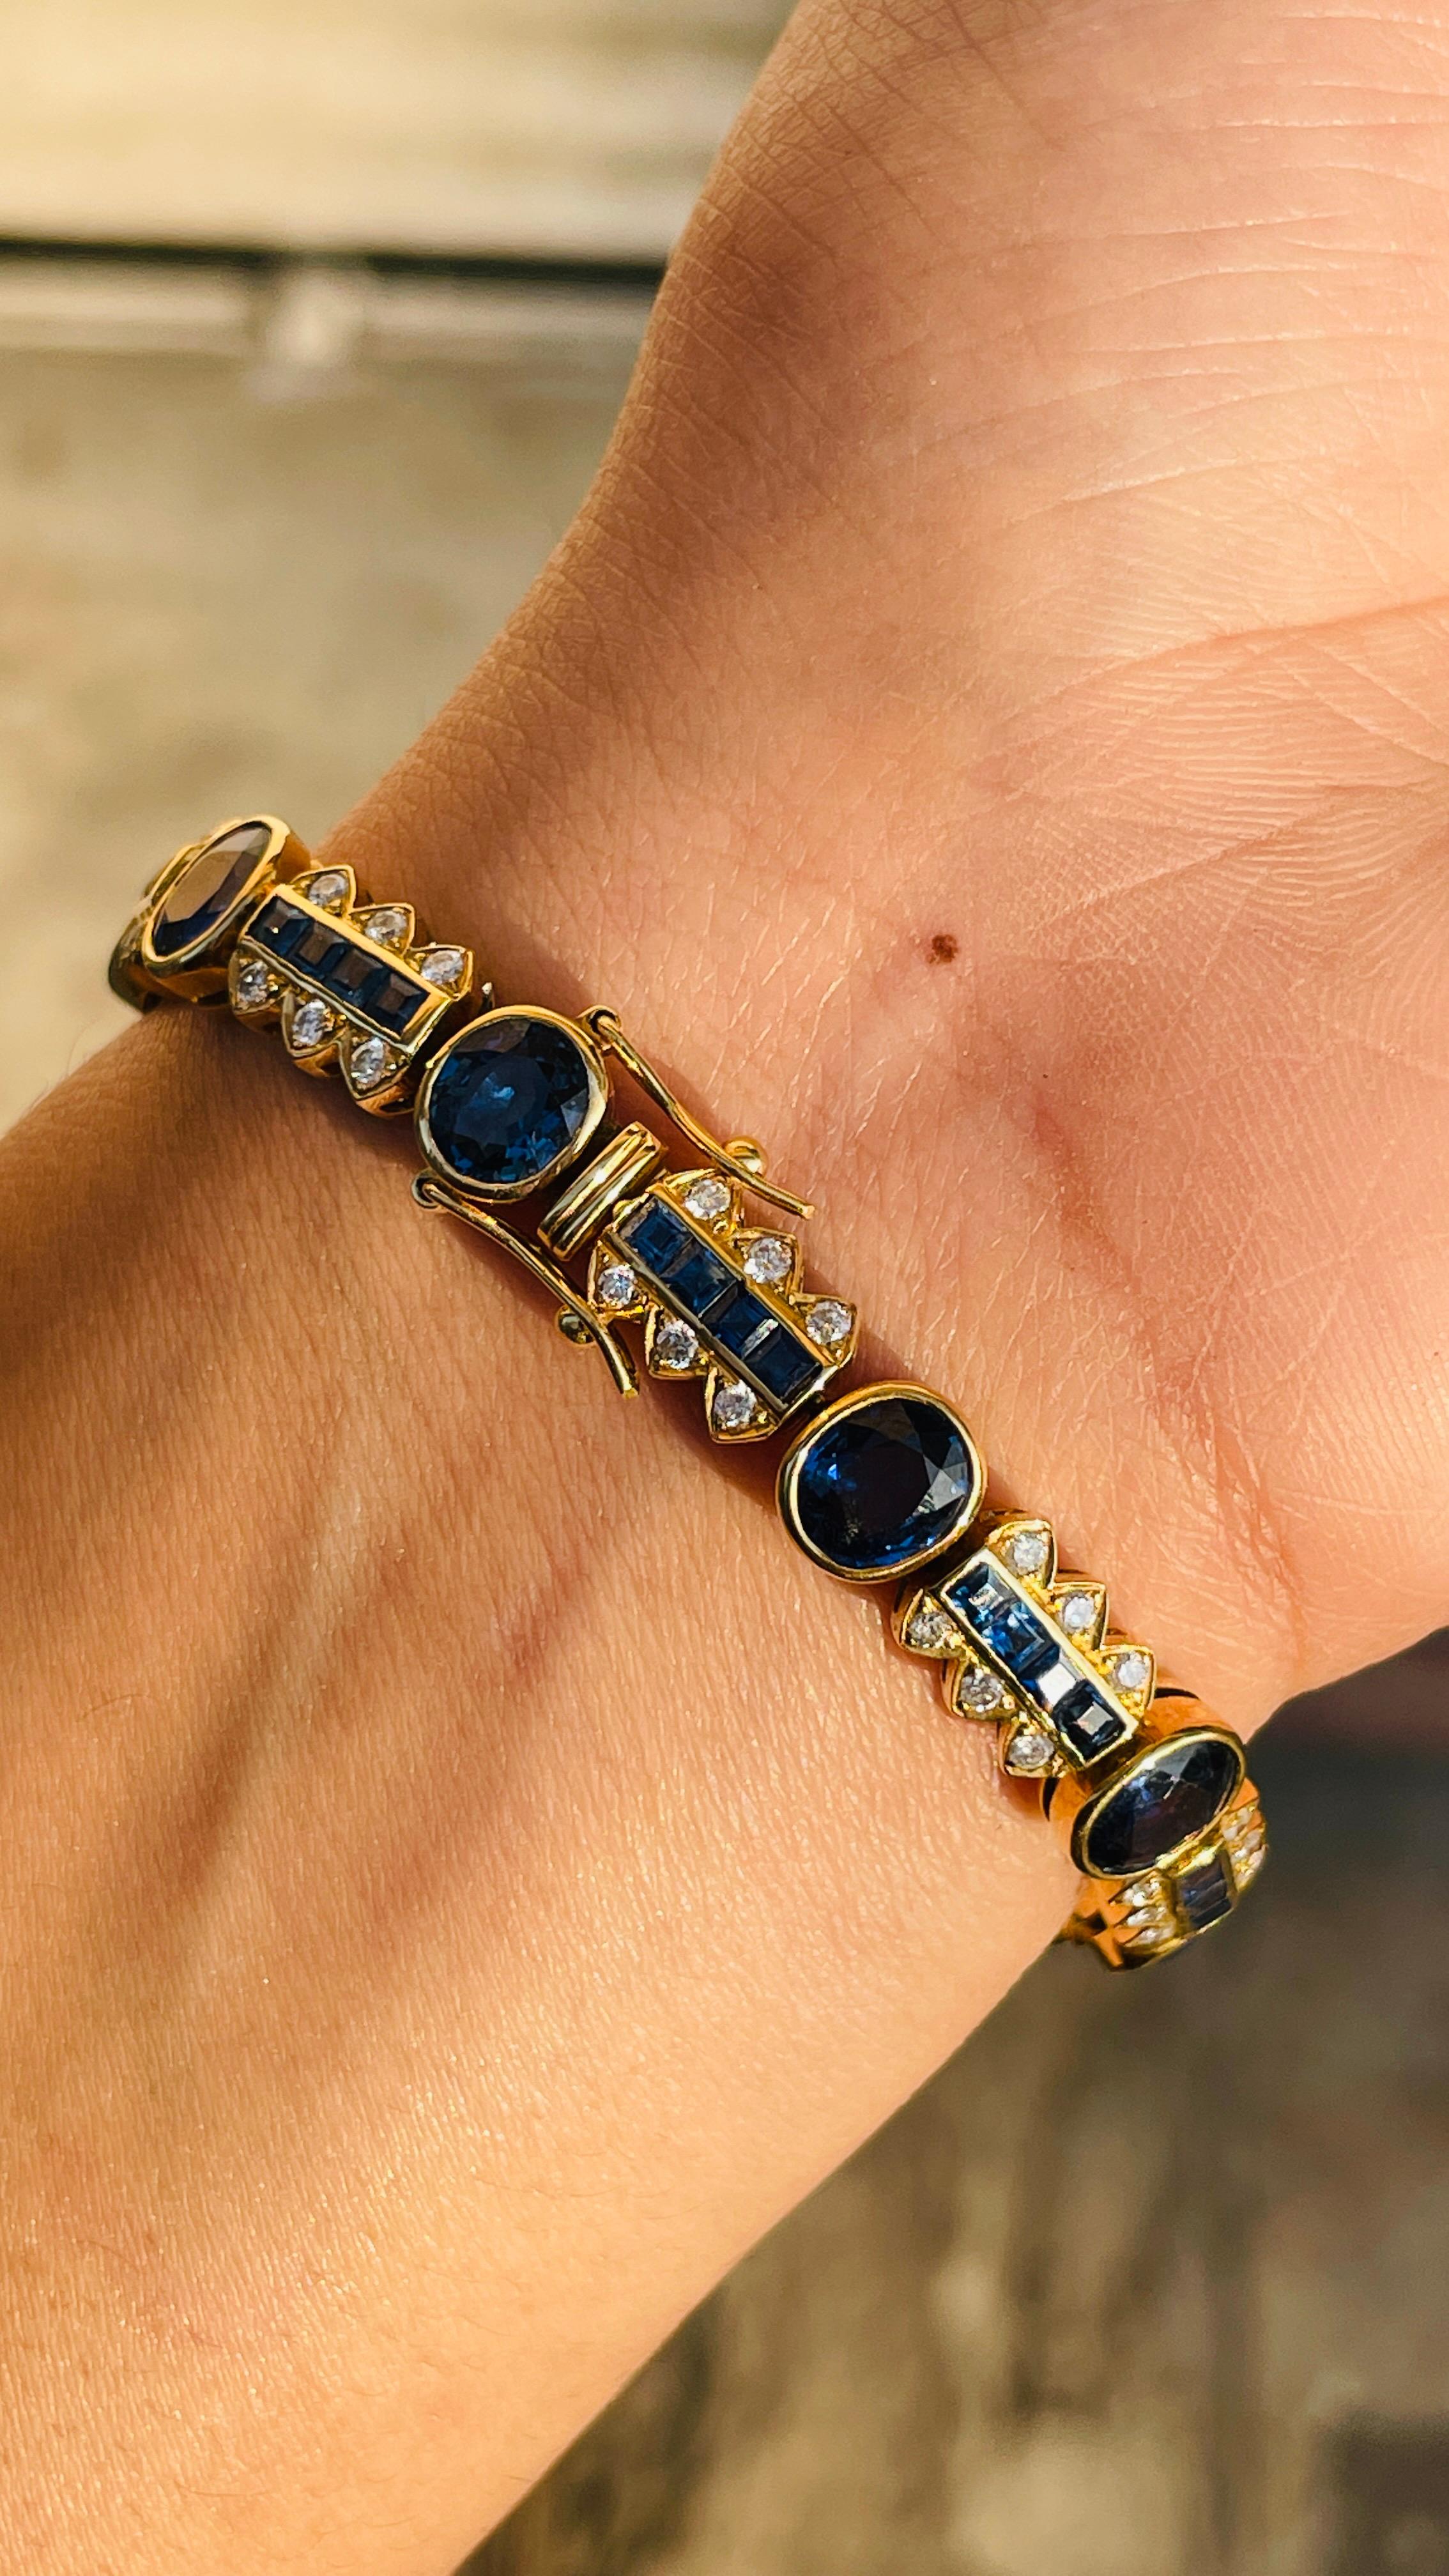 Blue Sapphire and Diamond bracelet in 18K Gold. It has a perfect oval and square cut gemstone to make you stand out on any occasion or an event.
A tennis bracelet is an essential piece of jewelry when it comes to your wedding day. The sleek and